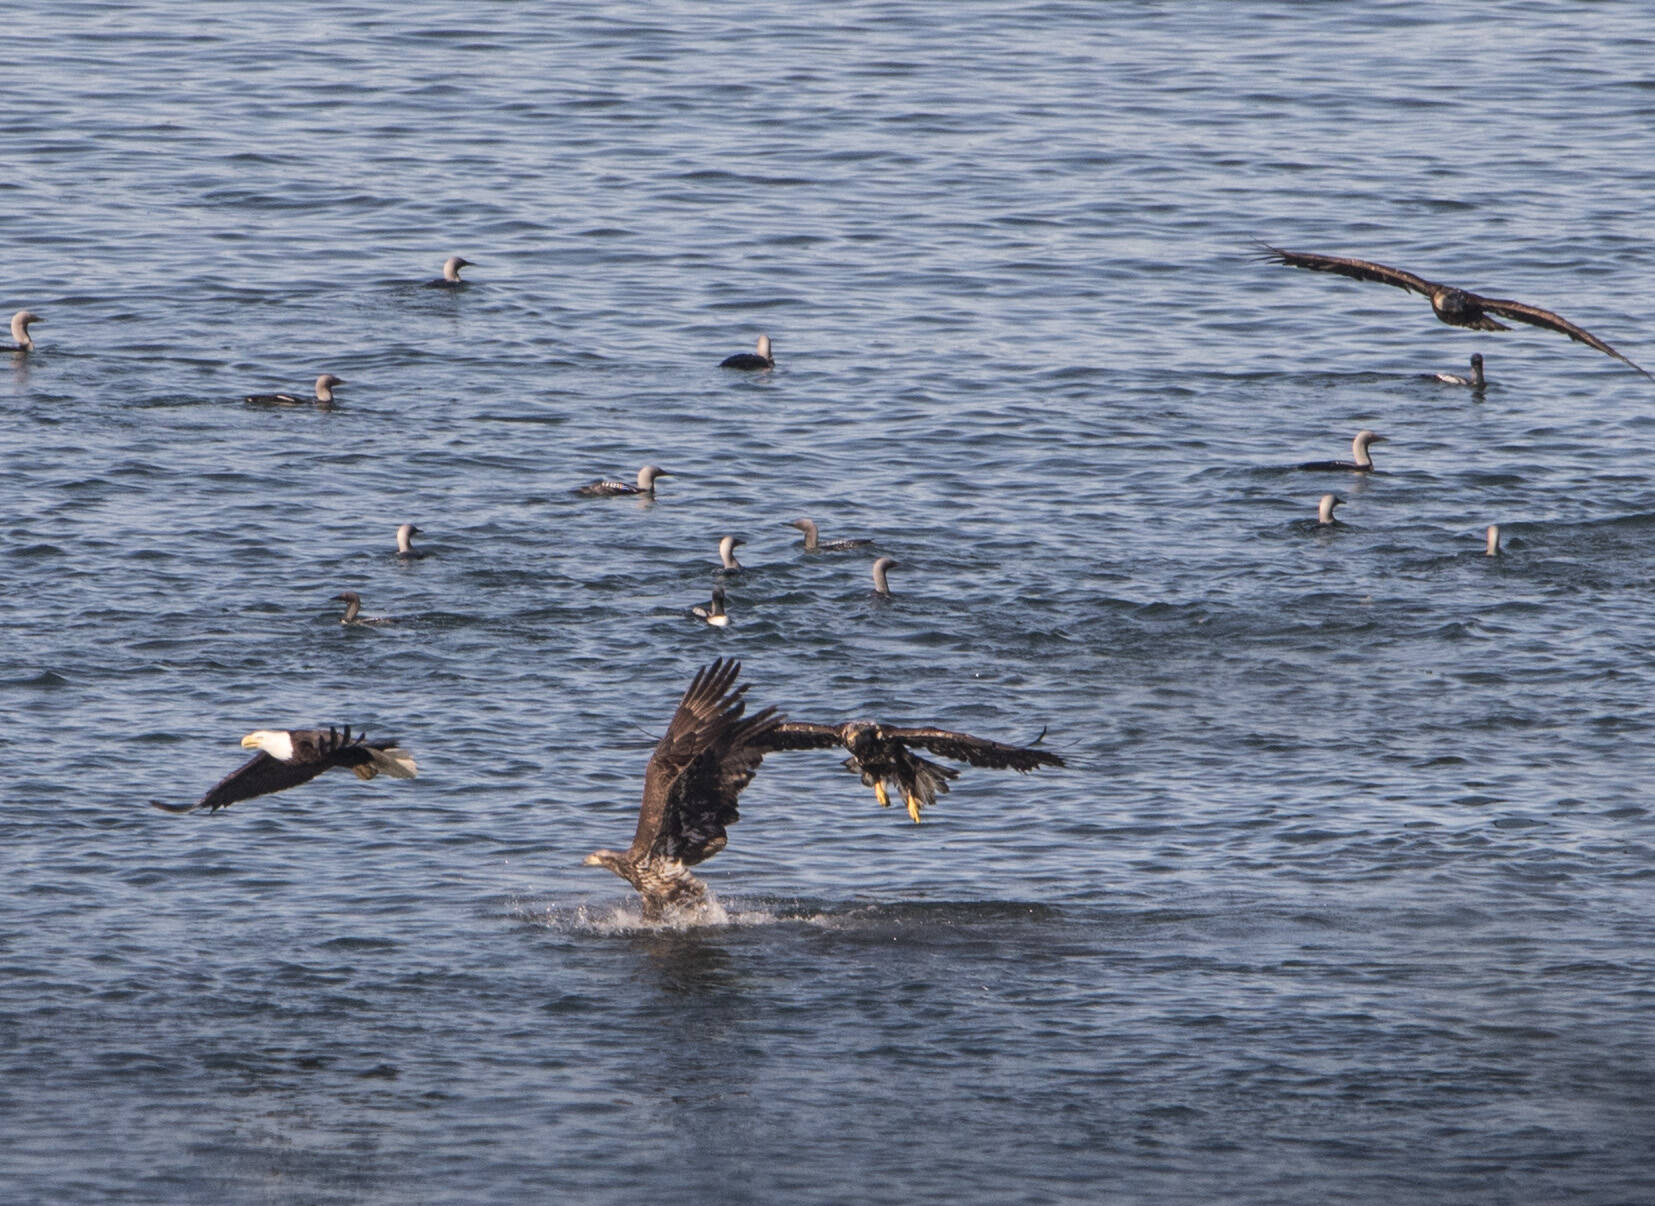 American bald eagles pick up leftover scraps from migrating Pacific loon feeding frenzy in Favorite Channel. (Courtesy Photo / Kenneth Gill, gillfoto)